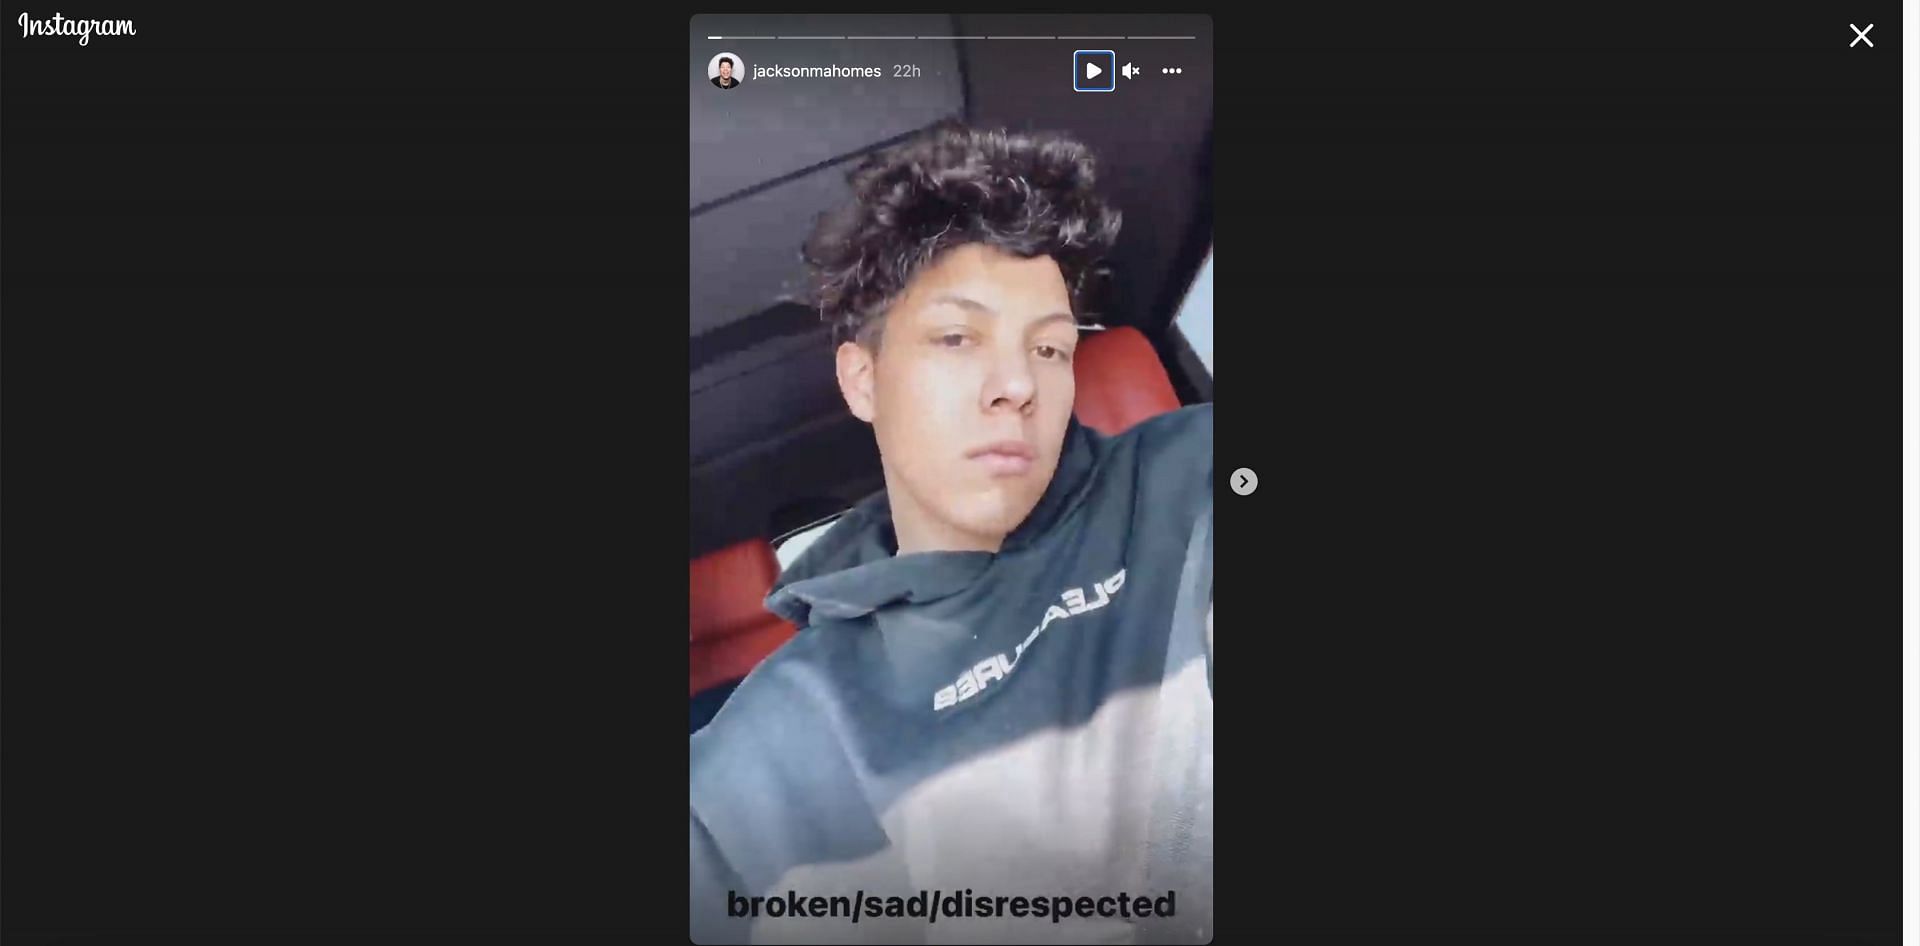 Patrick Mahomes's brother Jackson says the media is 'destroying' his life